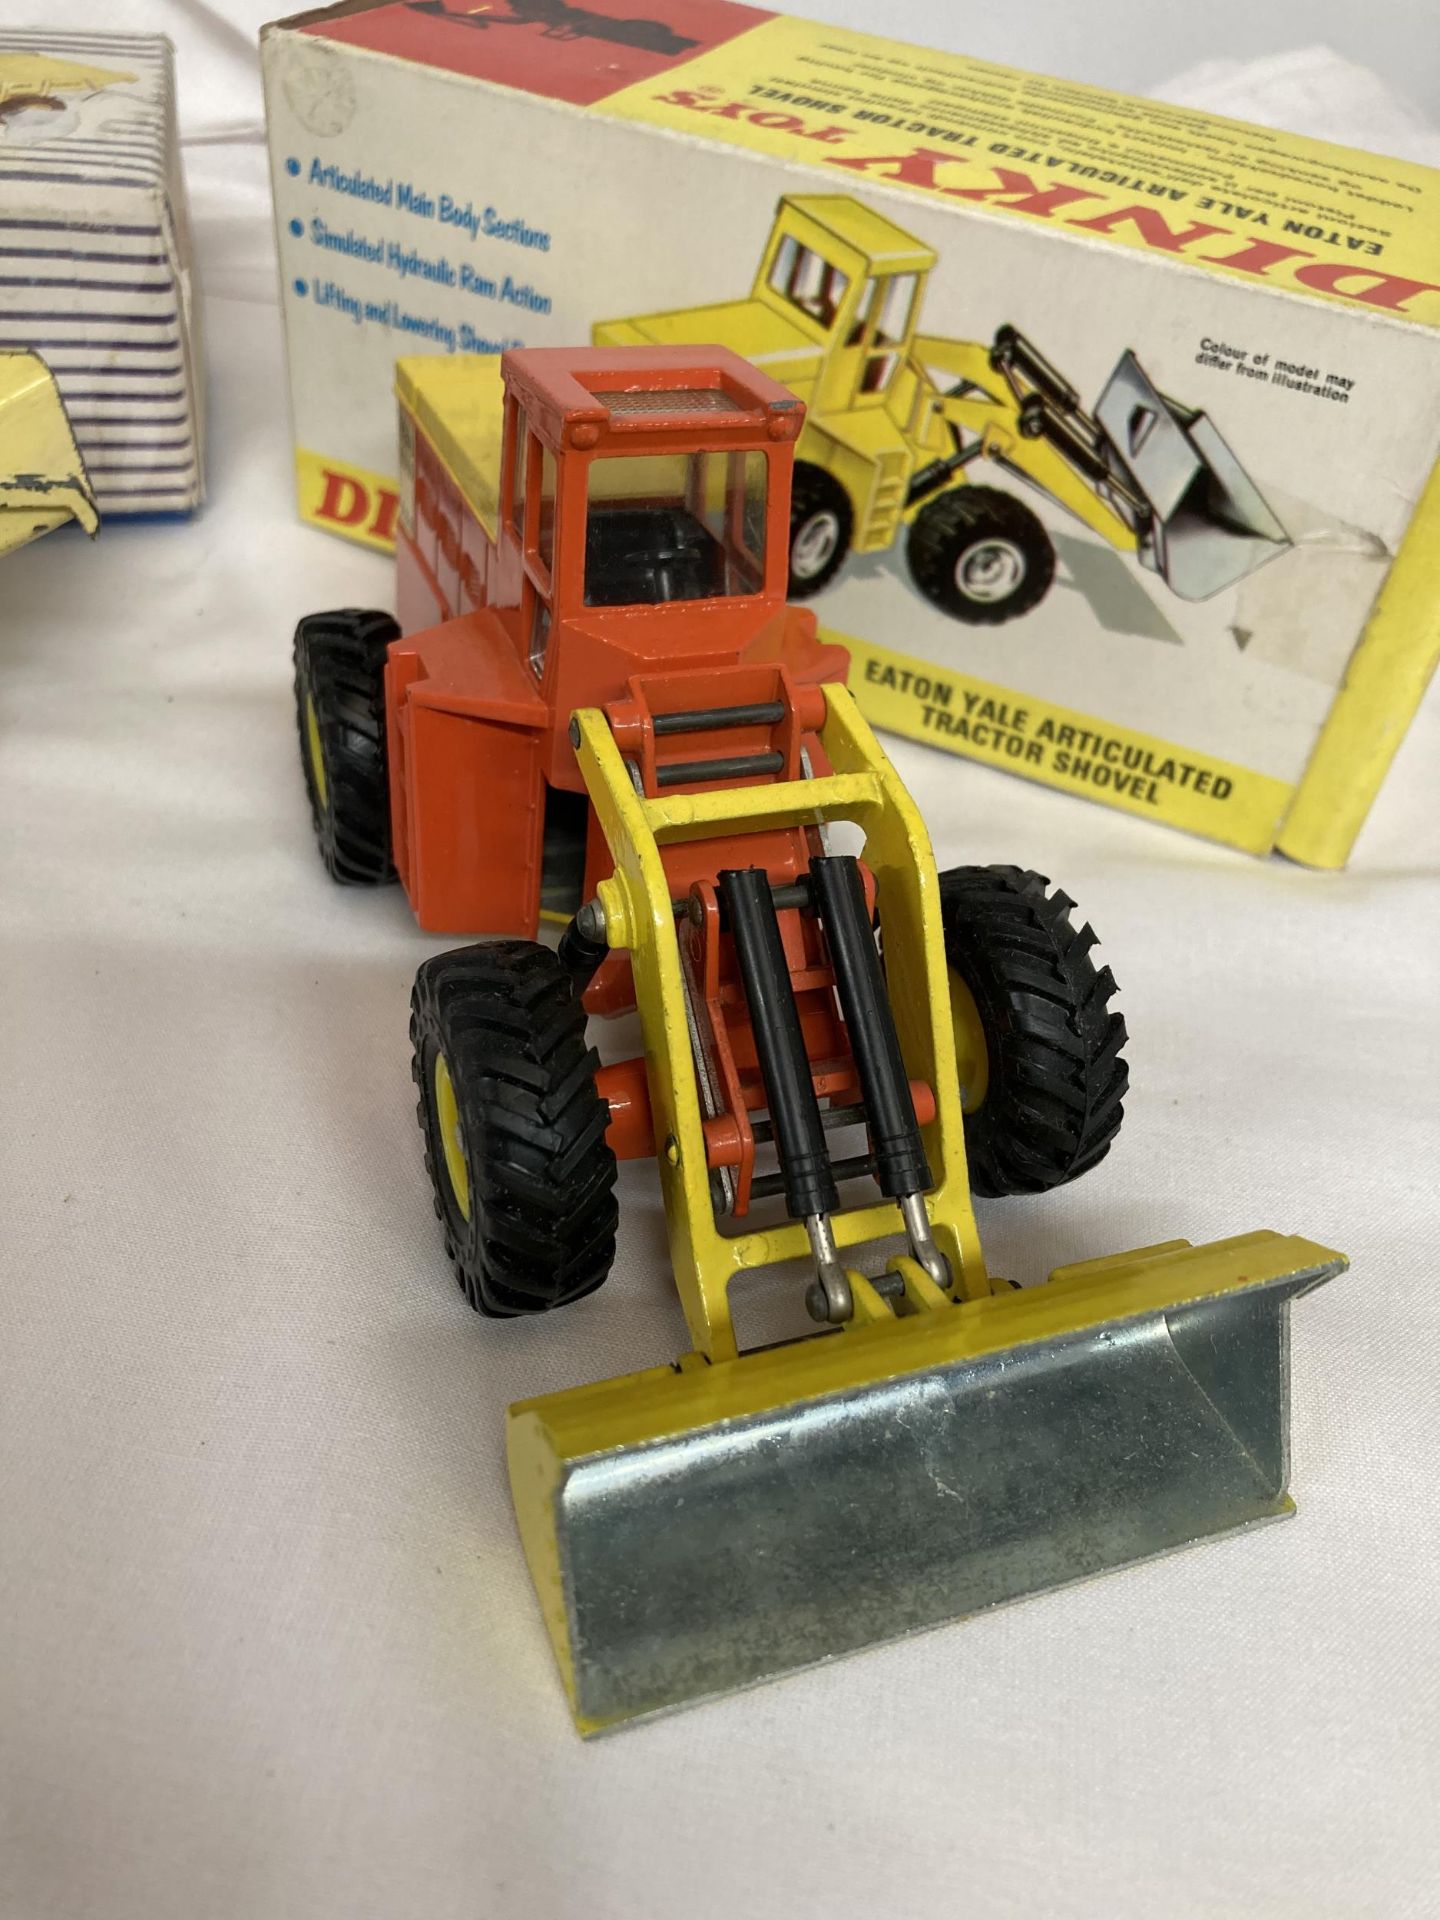 TWO BOXED DINKY MODELS NO. 965 - A EUCLID DUMP TRUCK AND NO. 973 - AN EATON YALE LOADING SHOVEL - Bild 3 aus 3